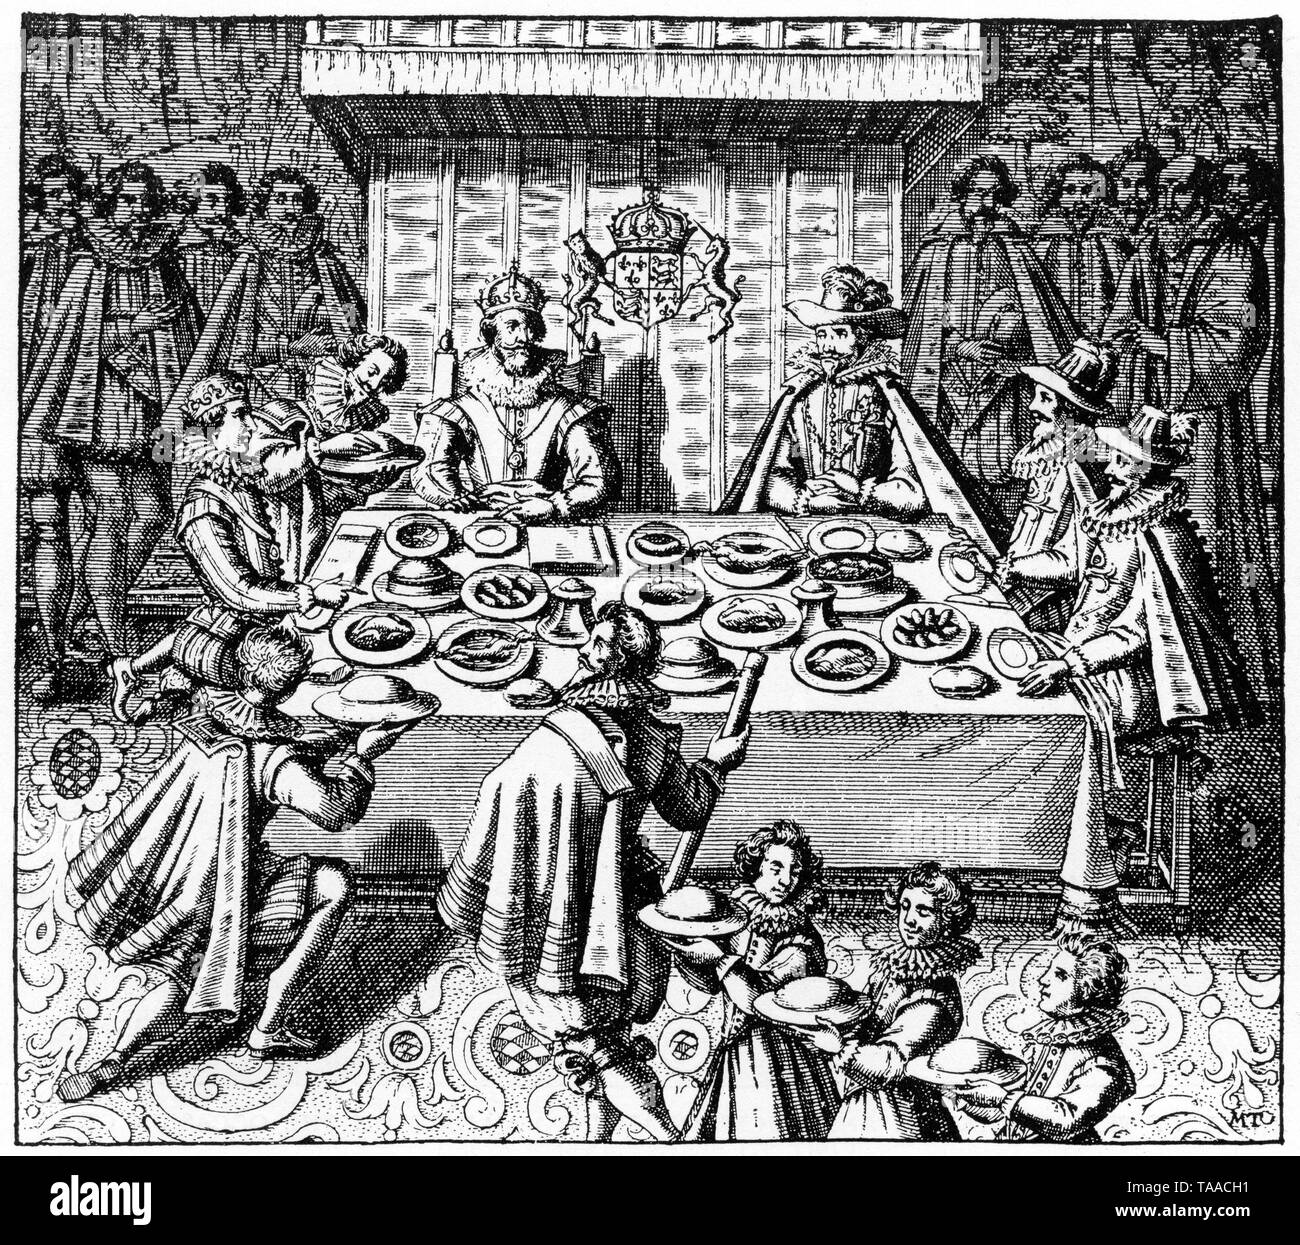 King James I (1566-1625) feasting with the Spanish Ambassador extraordinary who accompanied Prince Charles the future King Charles I (1600-1649) and George Villiers, 1st Duke of Buckingham KG (1592 -1628) on their return from Madrid, 1623. Stock Photo